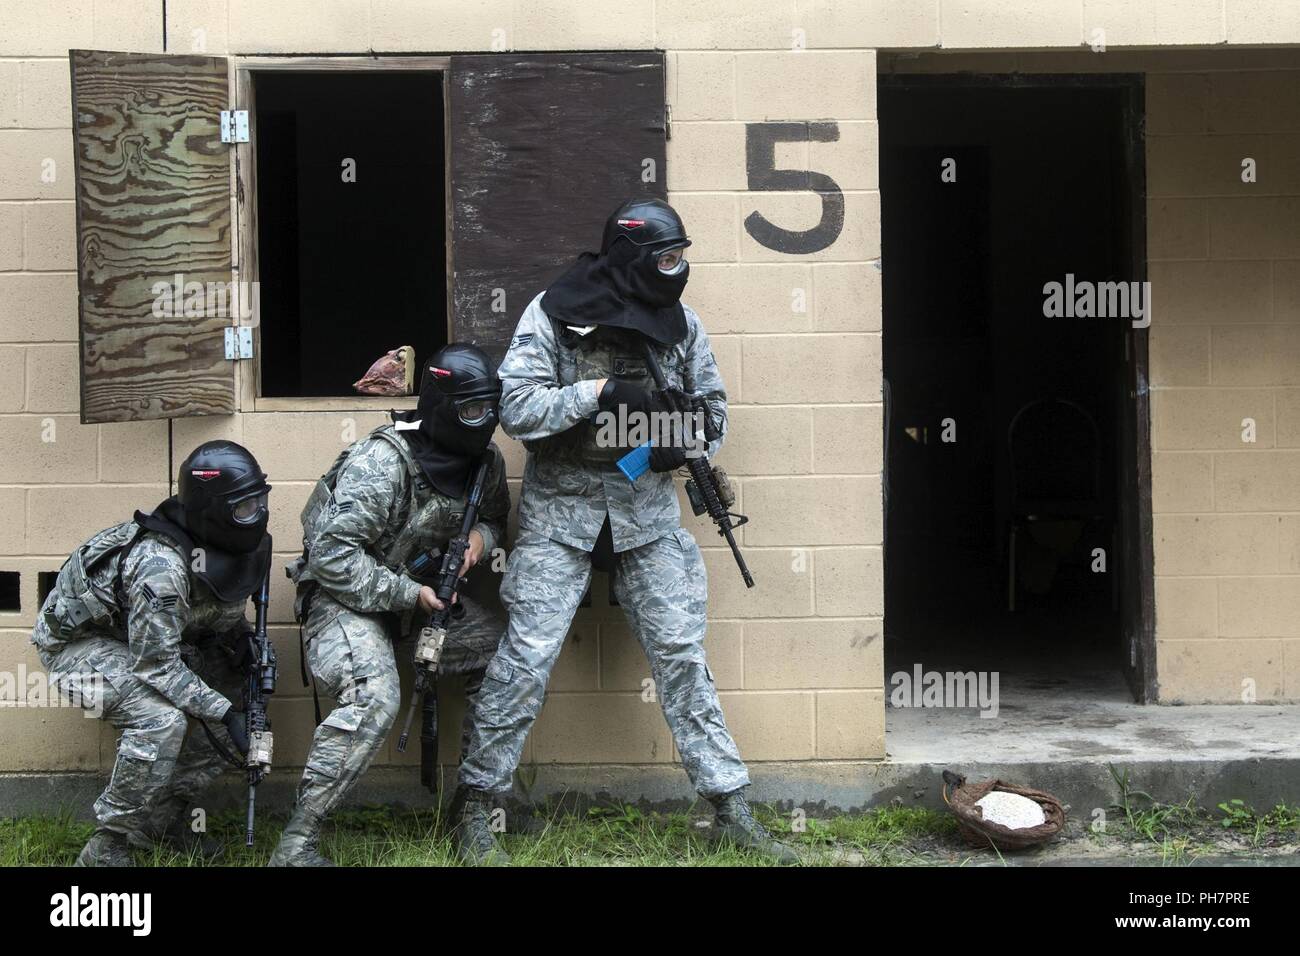 Airmen from the 23d Security Forces Squadron (SFS) prepare to clear a building during a Force on Force training scenario, June 29, 2018, at Moody Air Force Base, Ga. This training was held to ensure SFS Airmen are proficient in various tactics and procedures such as: building clear out, team movements, hostage rescue and properly applying cover fire. The scenario required Airmen to maneuver through multiple buildings to rescue a simulated victim guarded by opposing forces. Stock Photo